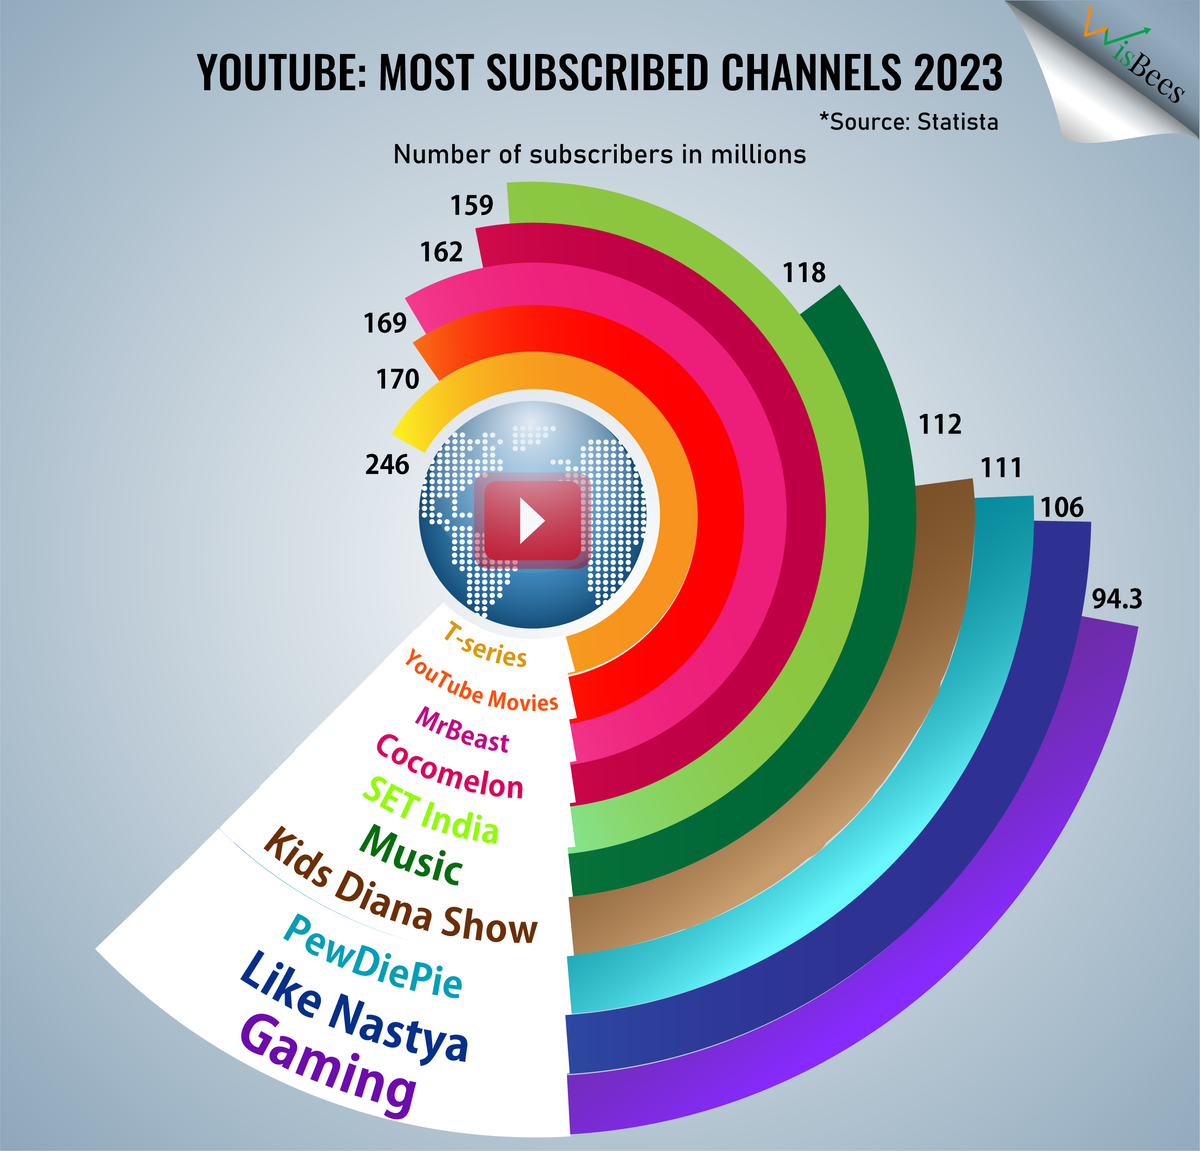 Which YouTube channel have the highest number of subscribers worldwide?